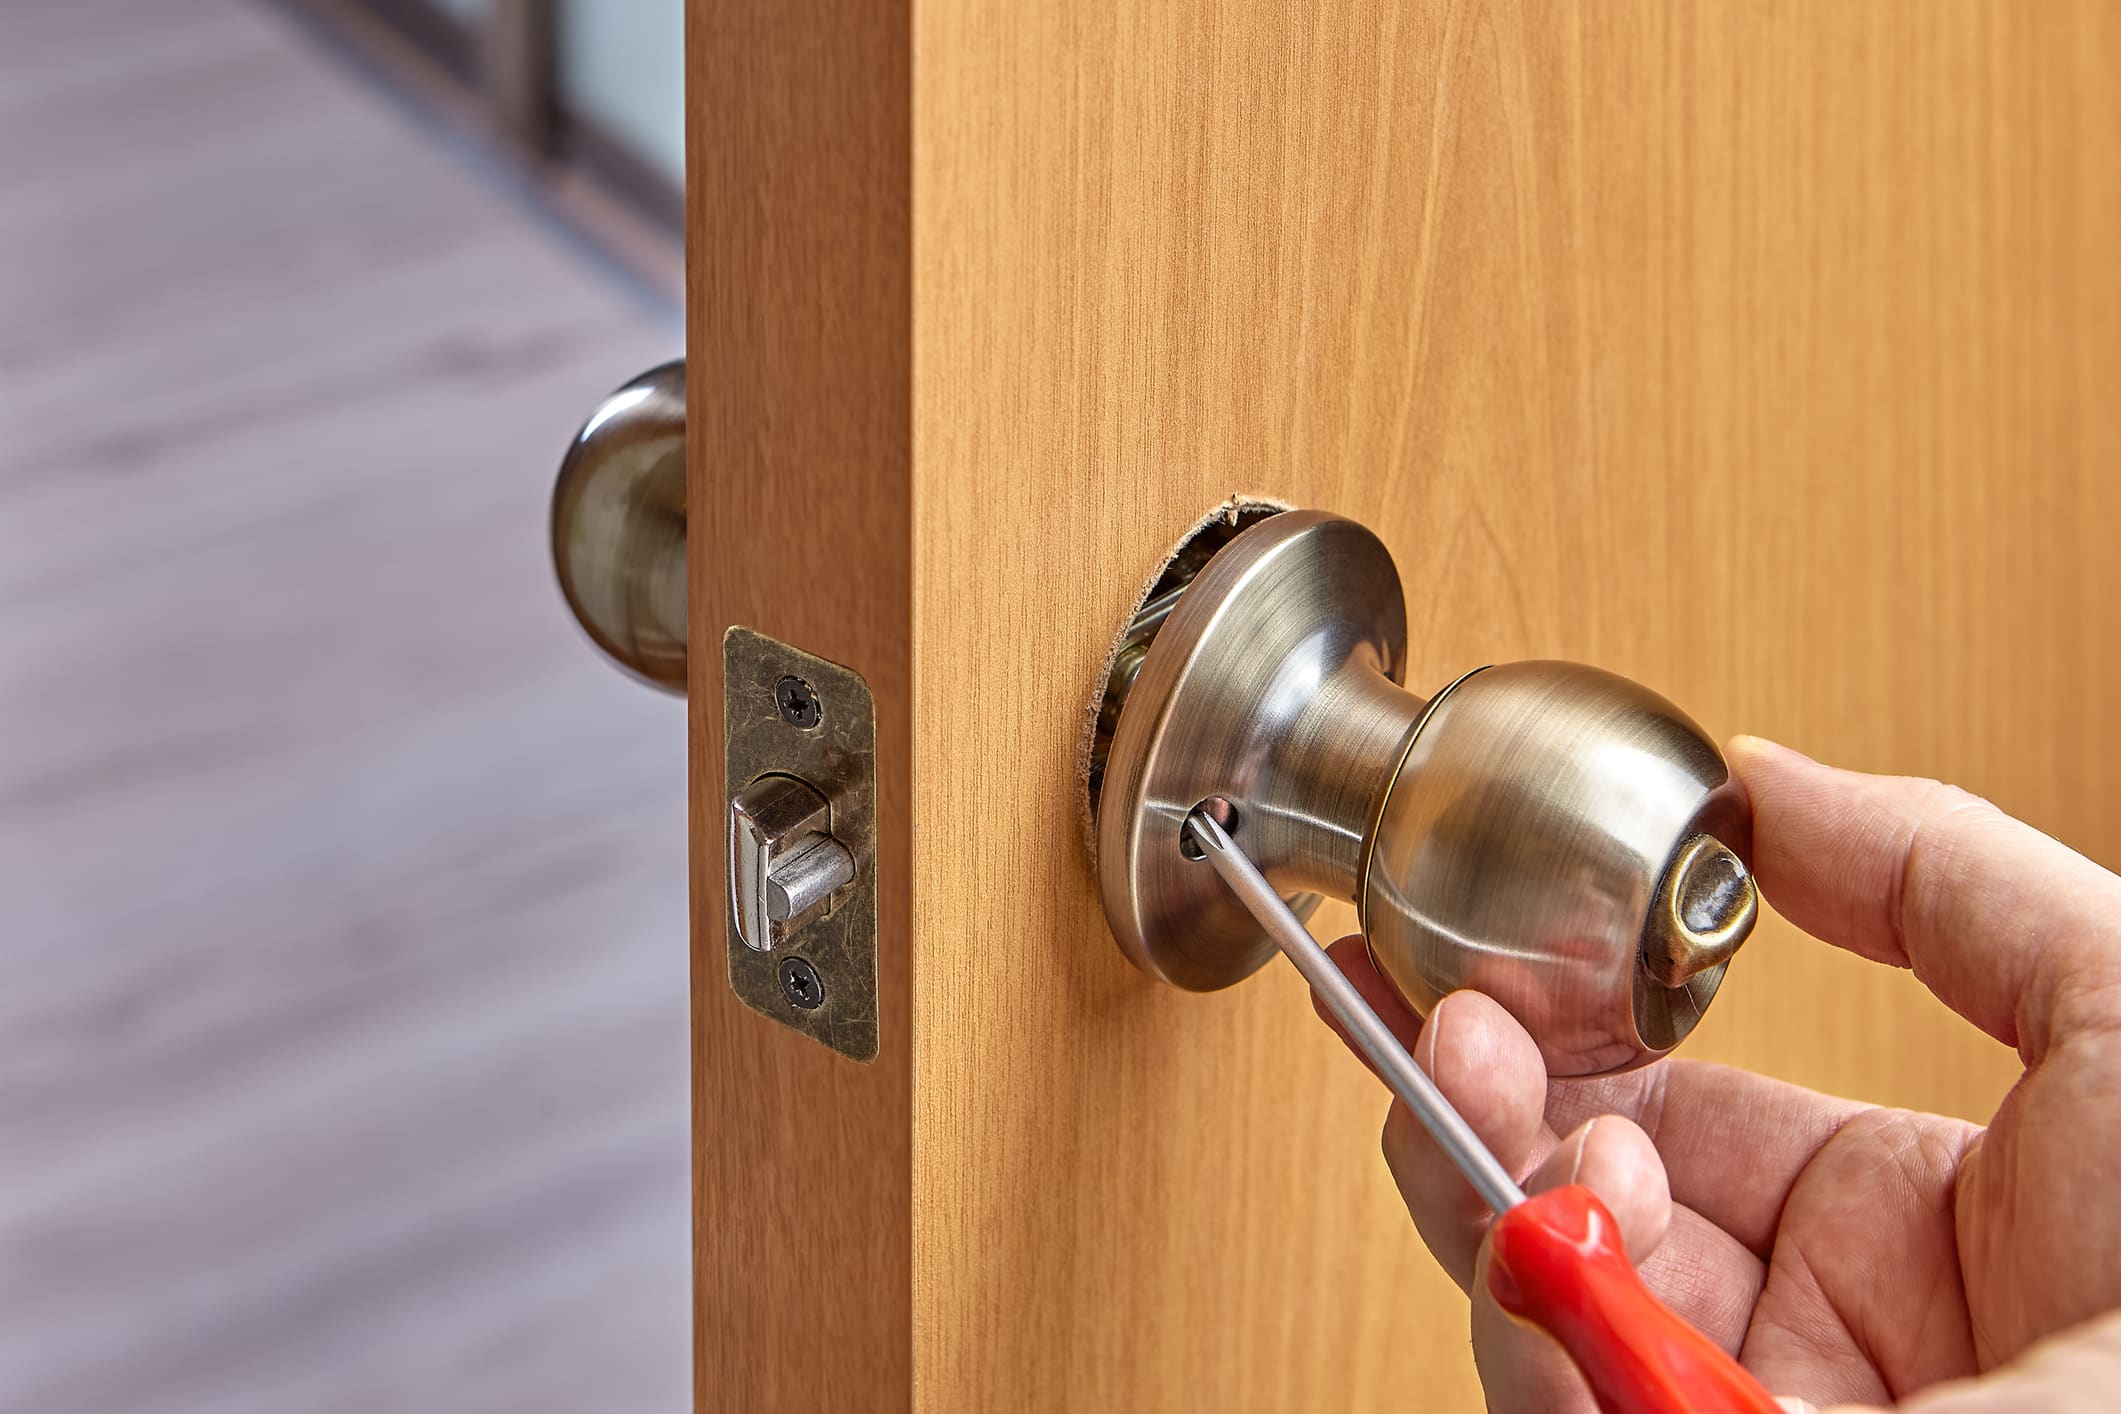 24/7 Professional Residential Locksmith Services Near Area